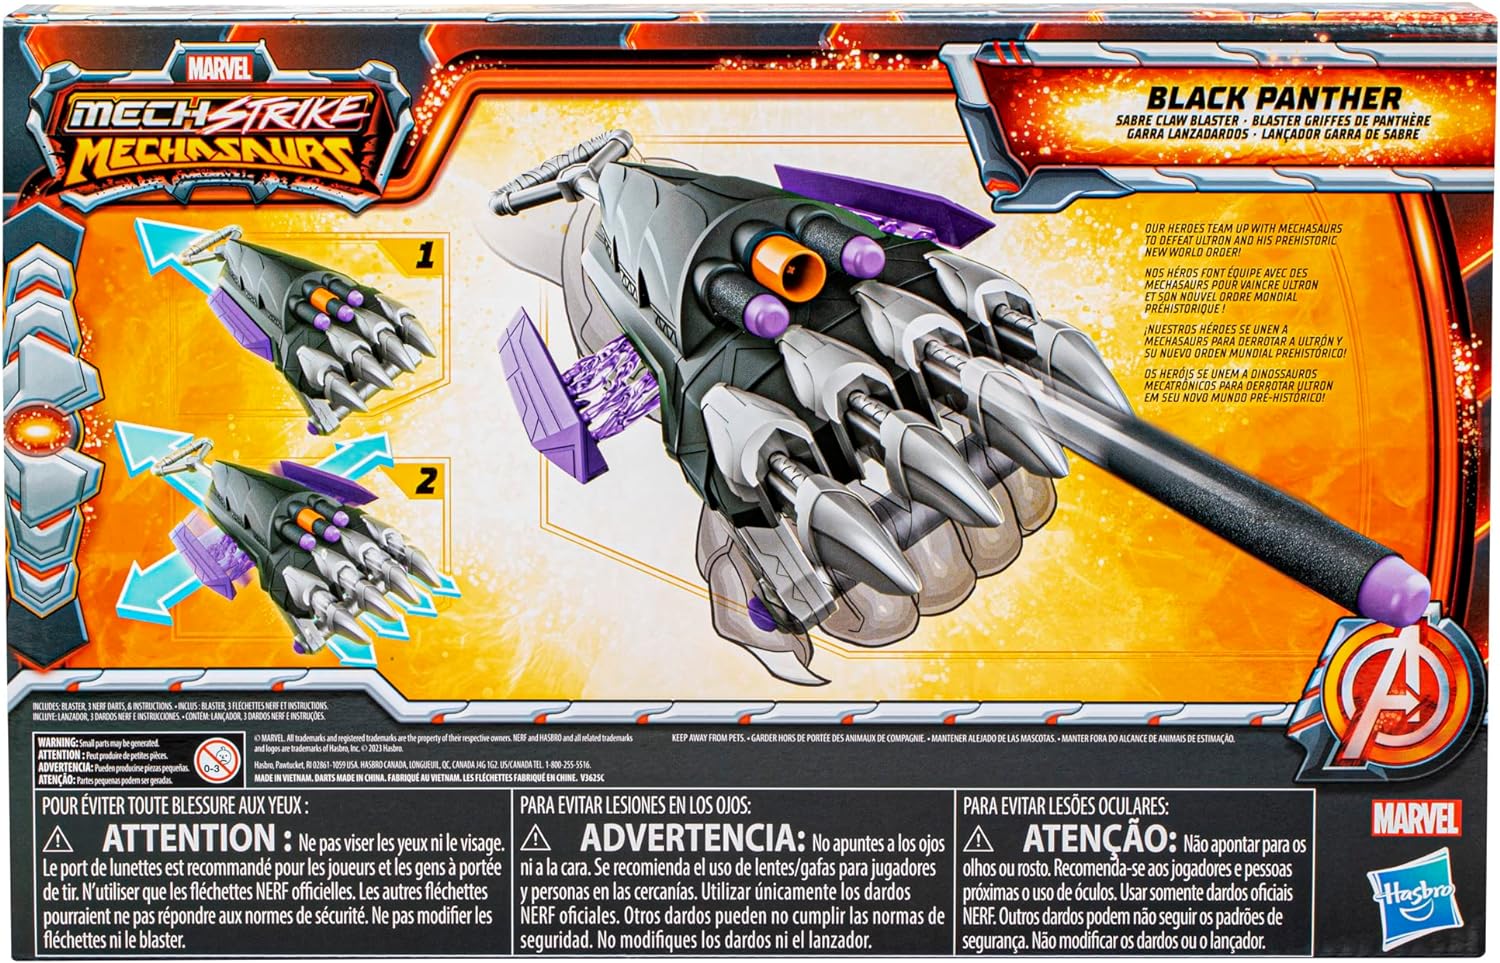 Marvel Mech Strike Mechasaurs Black Panther Sabre Claw Blaster, NERF Blaster with 3 Darts, Role Play Super Hero Toys for Kids Ages 5 and Up